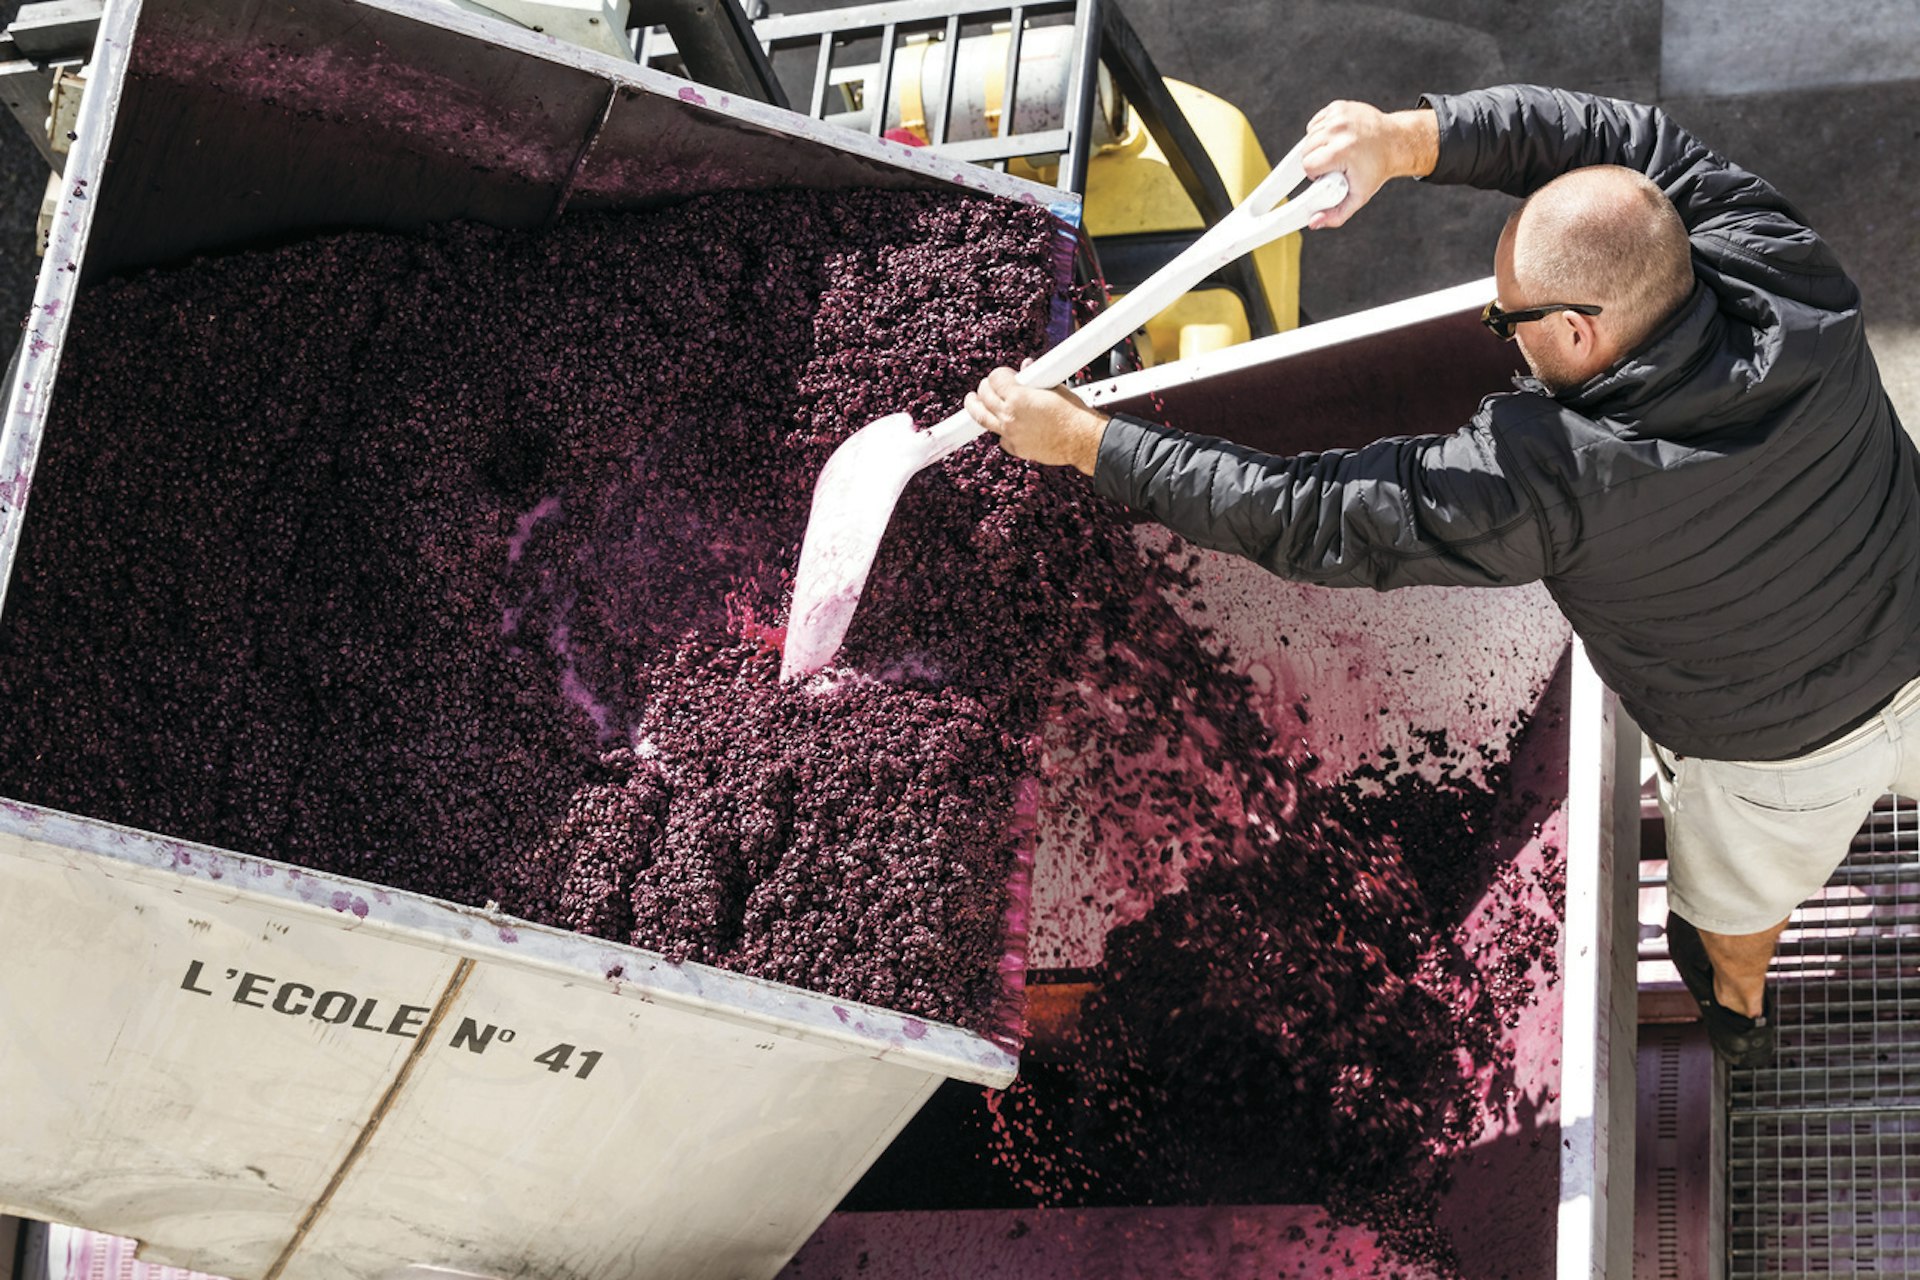 A man scrapes purple grapes with a spade from one large container to another